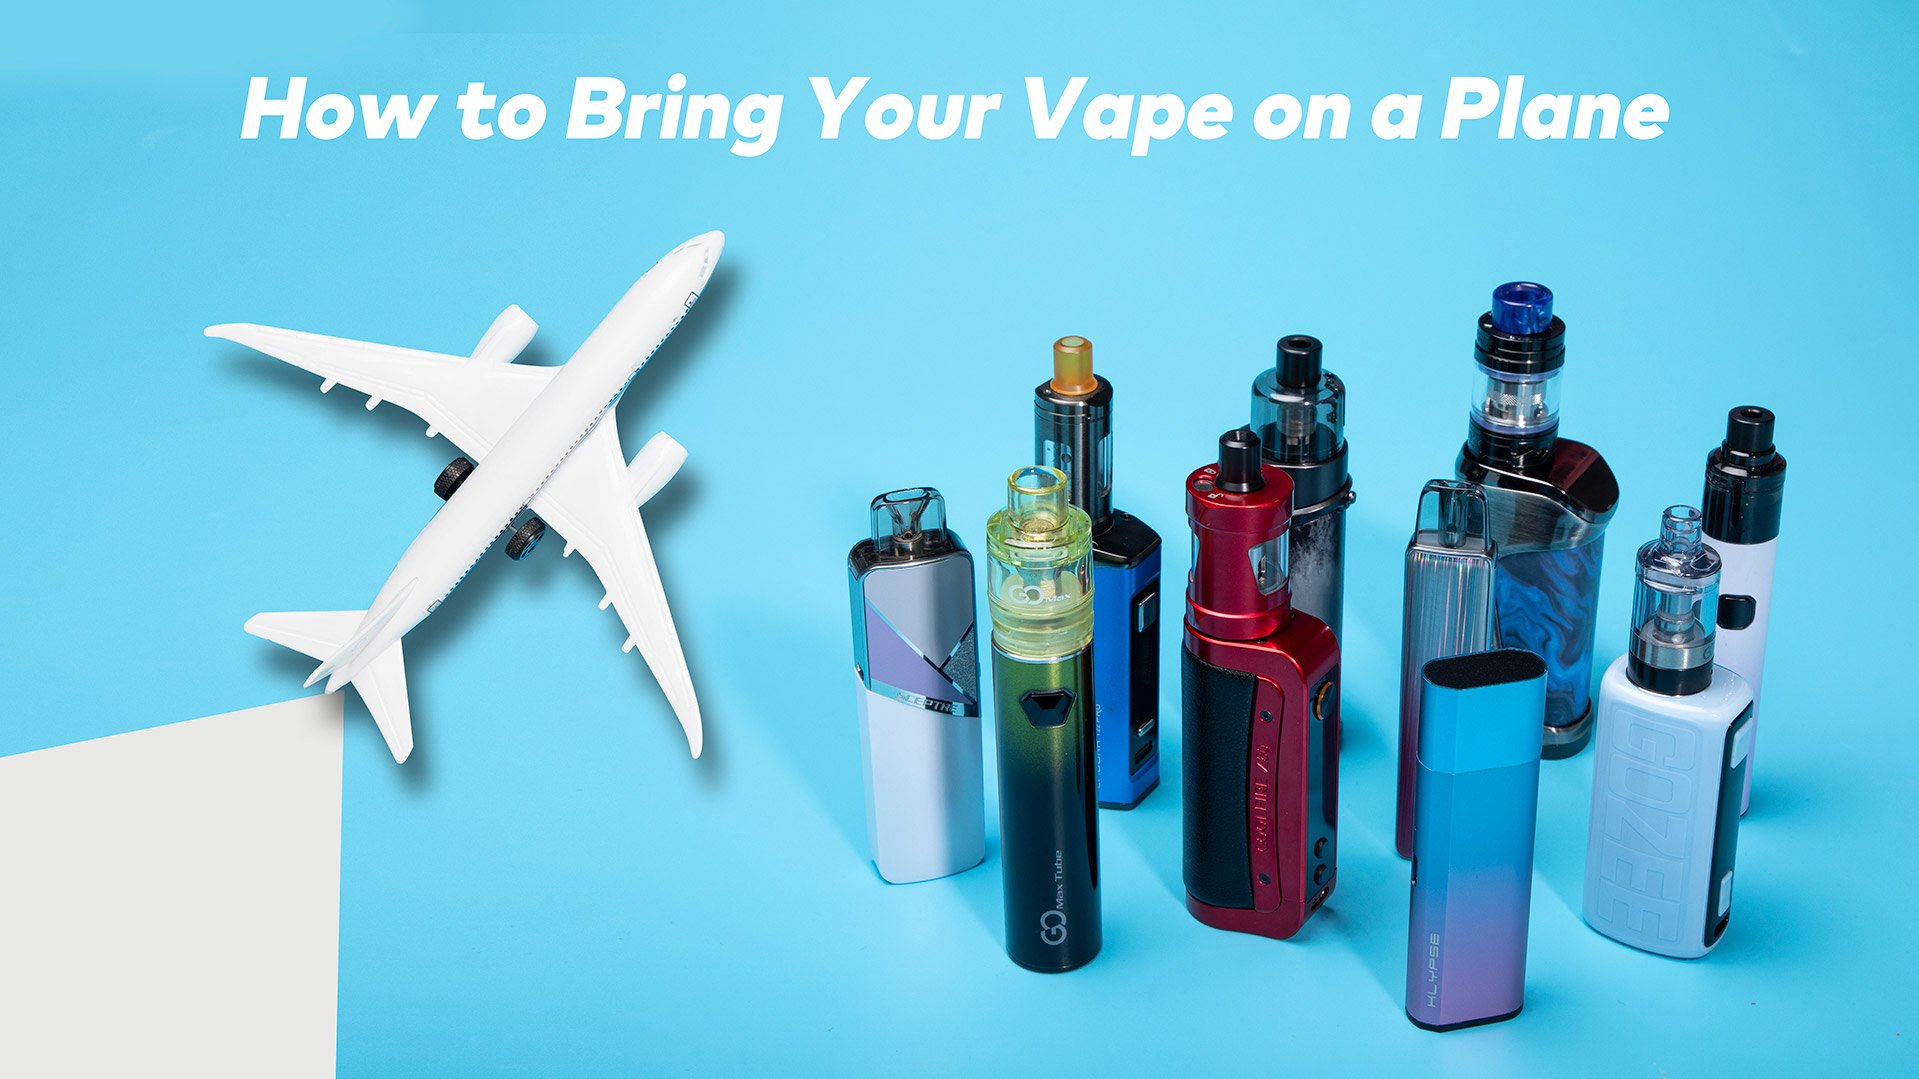 How Many Disposable Vapes Can I Bring on a Plane?